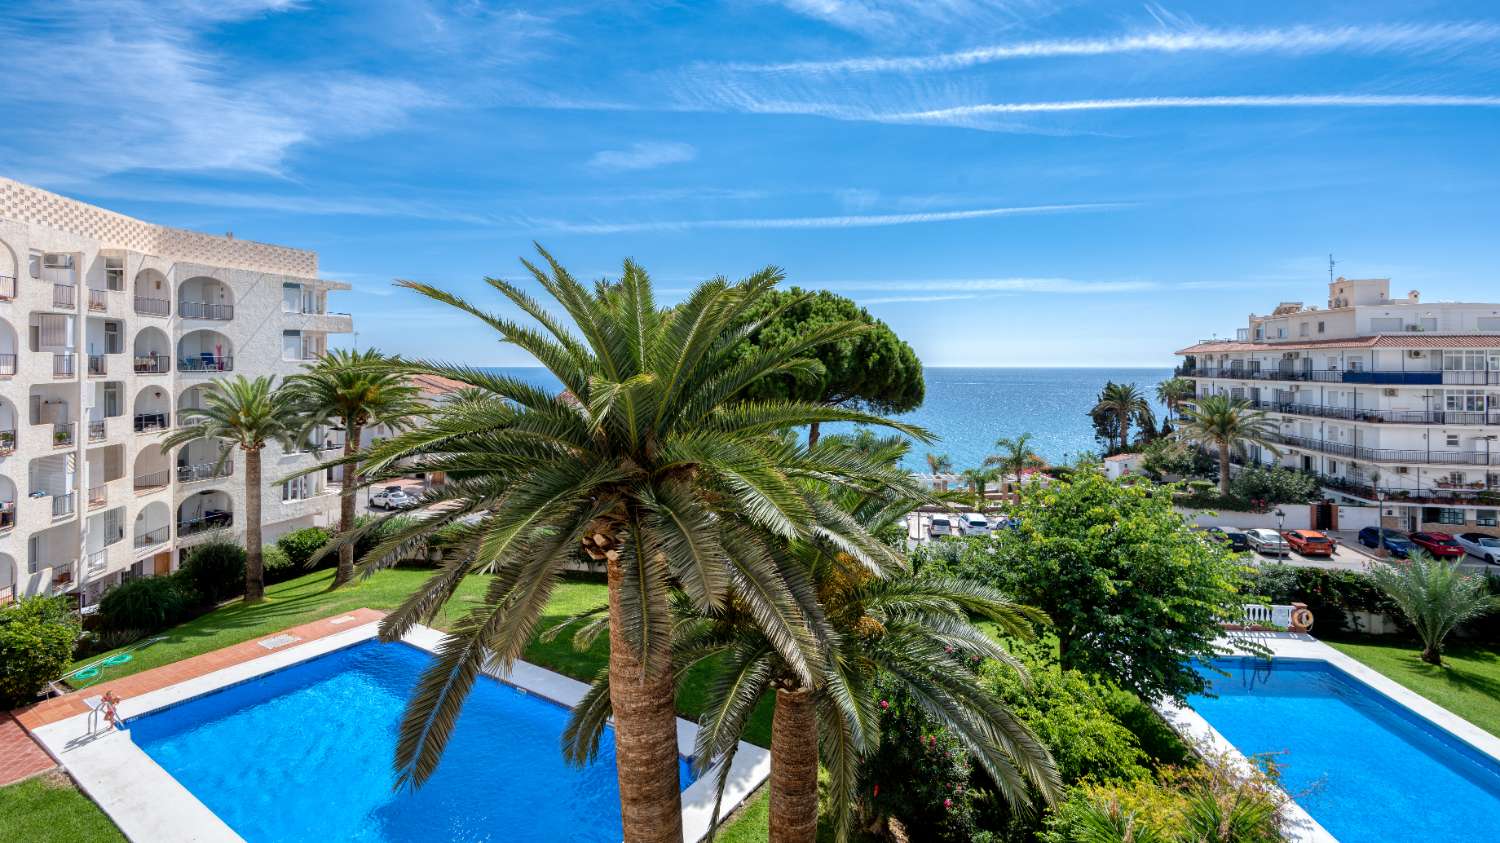 Apartment for sale in Nerja located in Verde Mar, one of the most desired apartment complexes in the center of Nerja